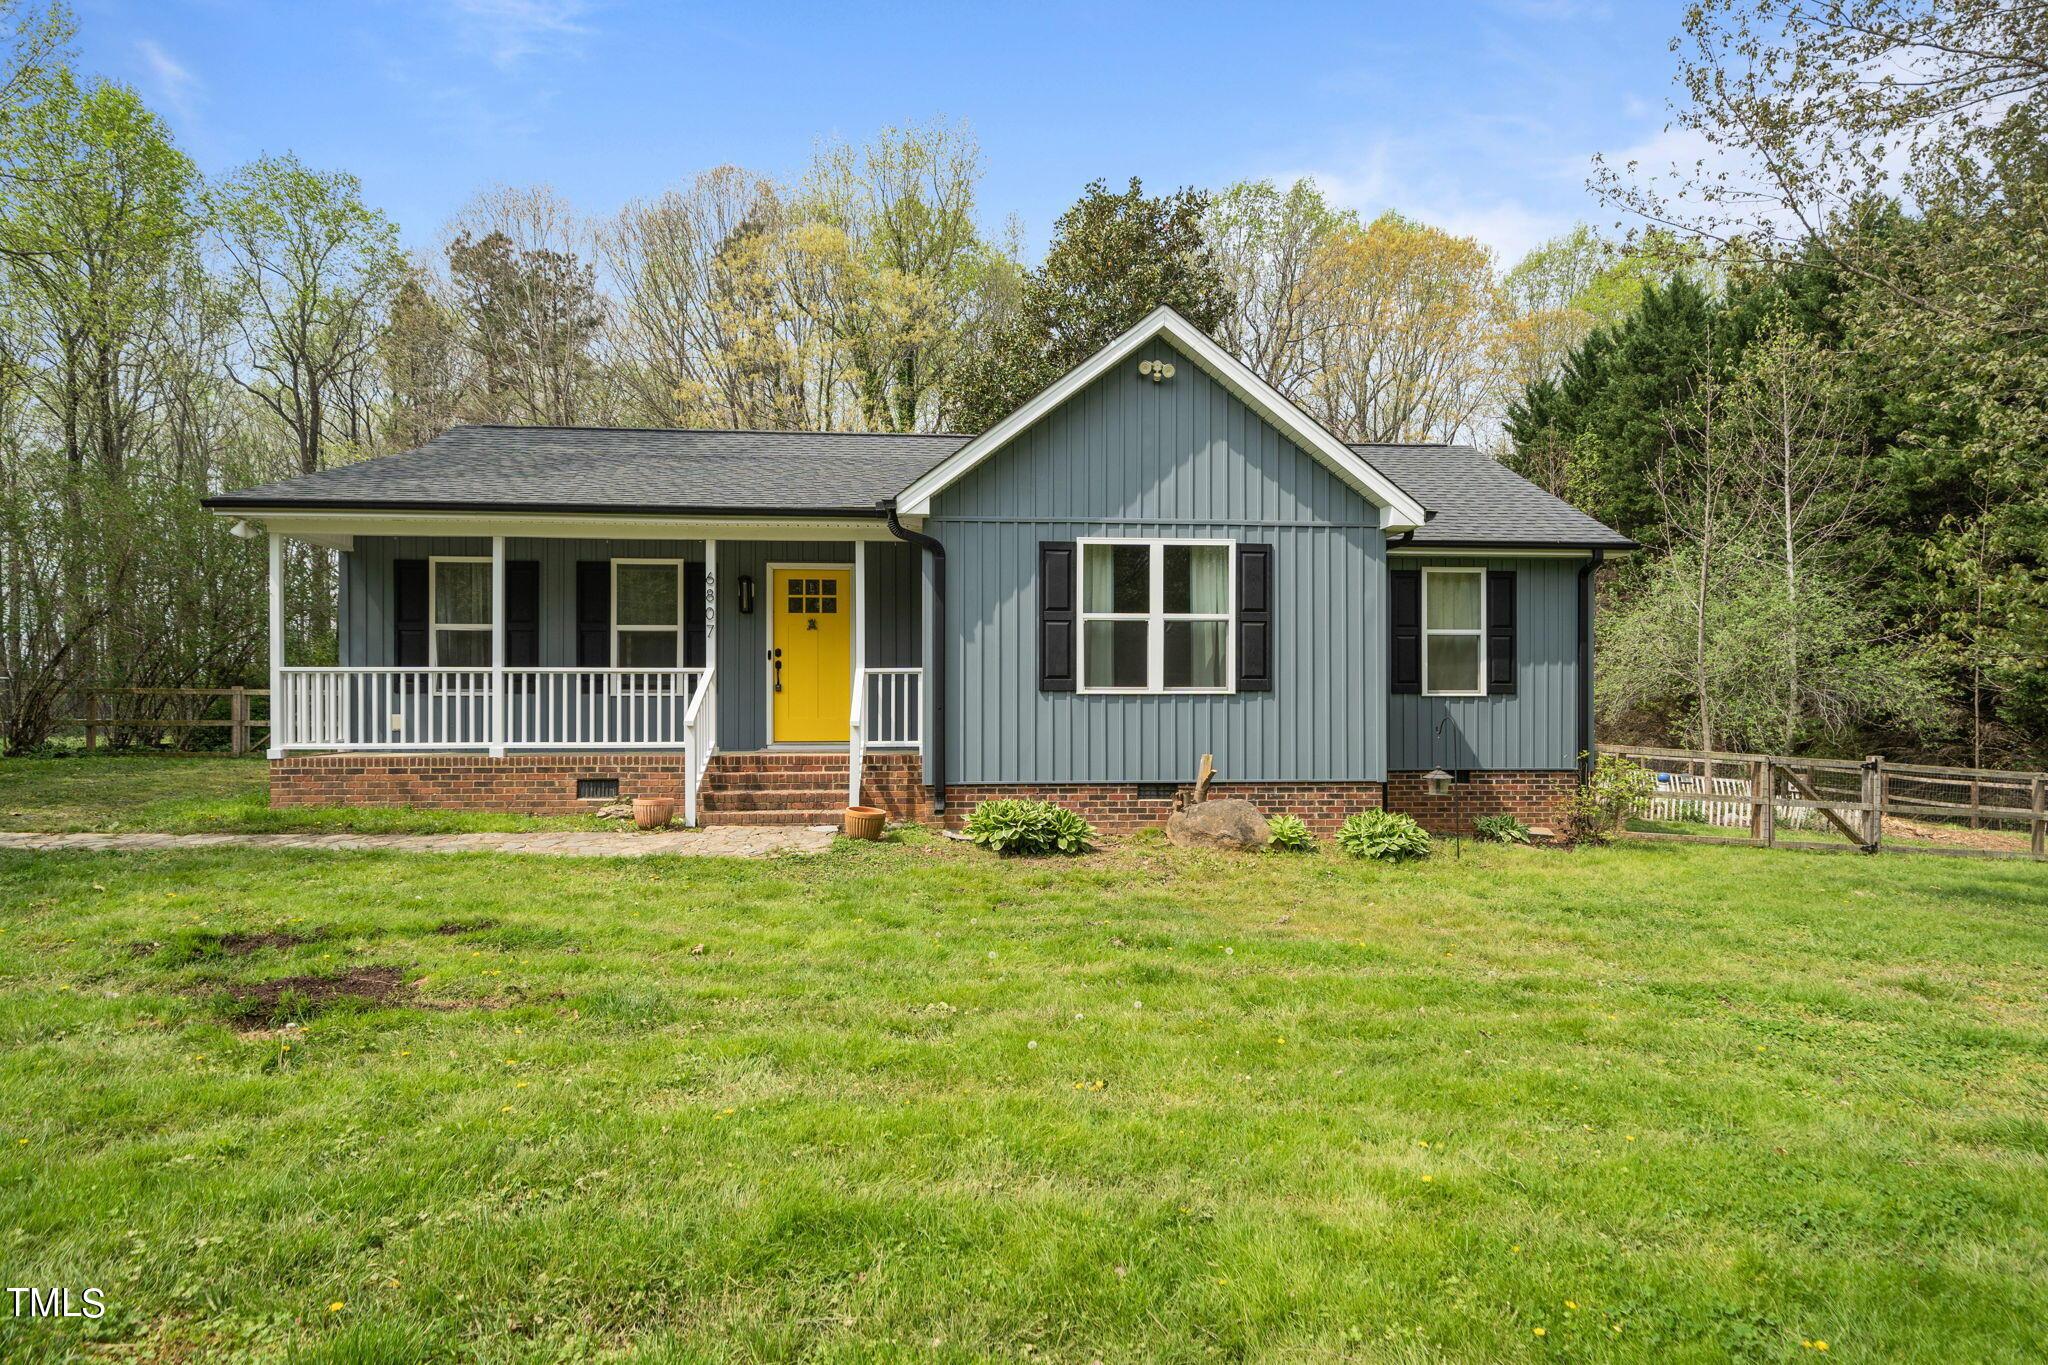 Photo one of 6807 Kiger Rd Rougemont NC 27572 | MLS 10020730